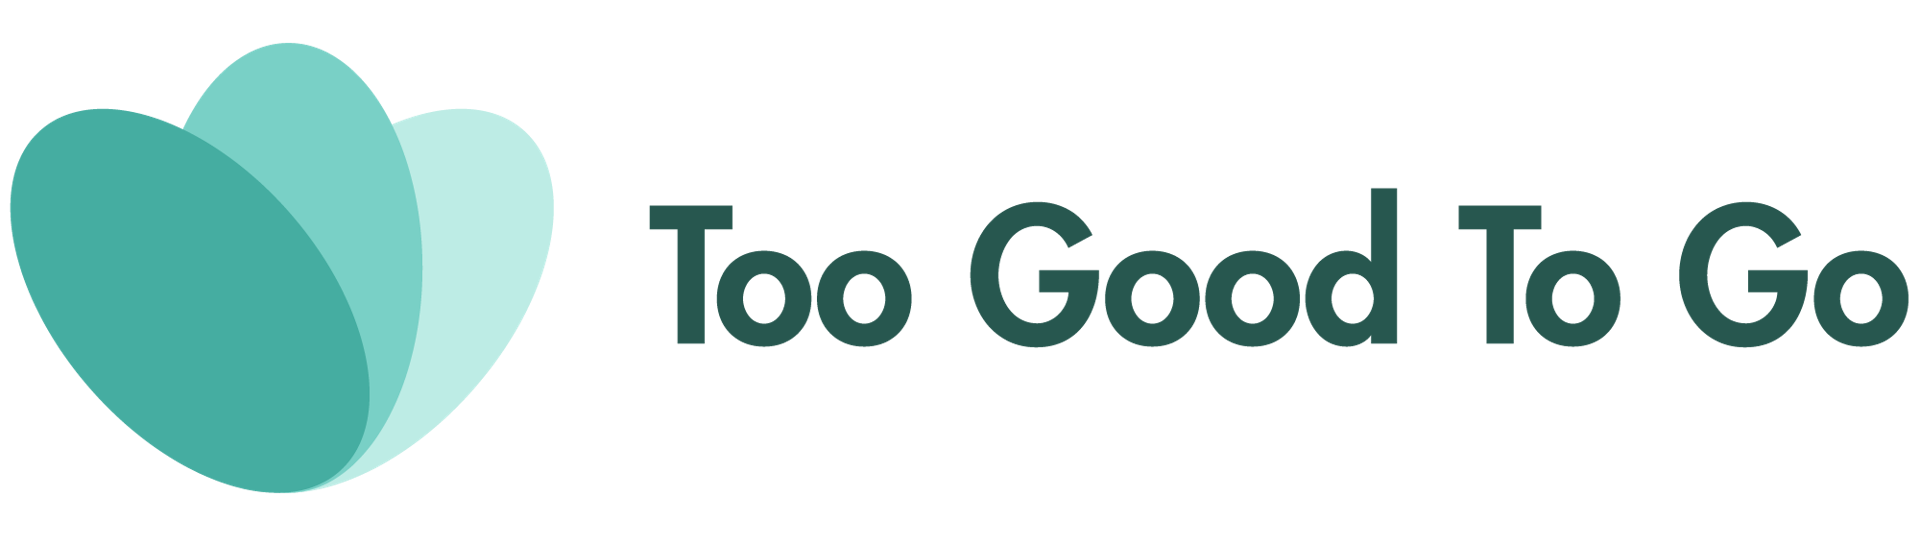 Too Good To Go